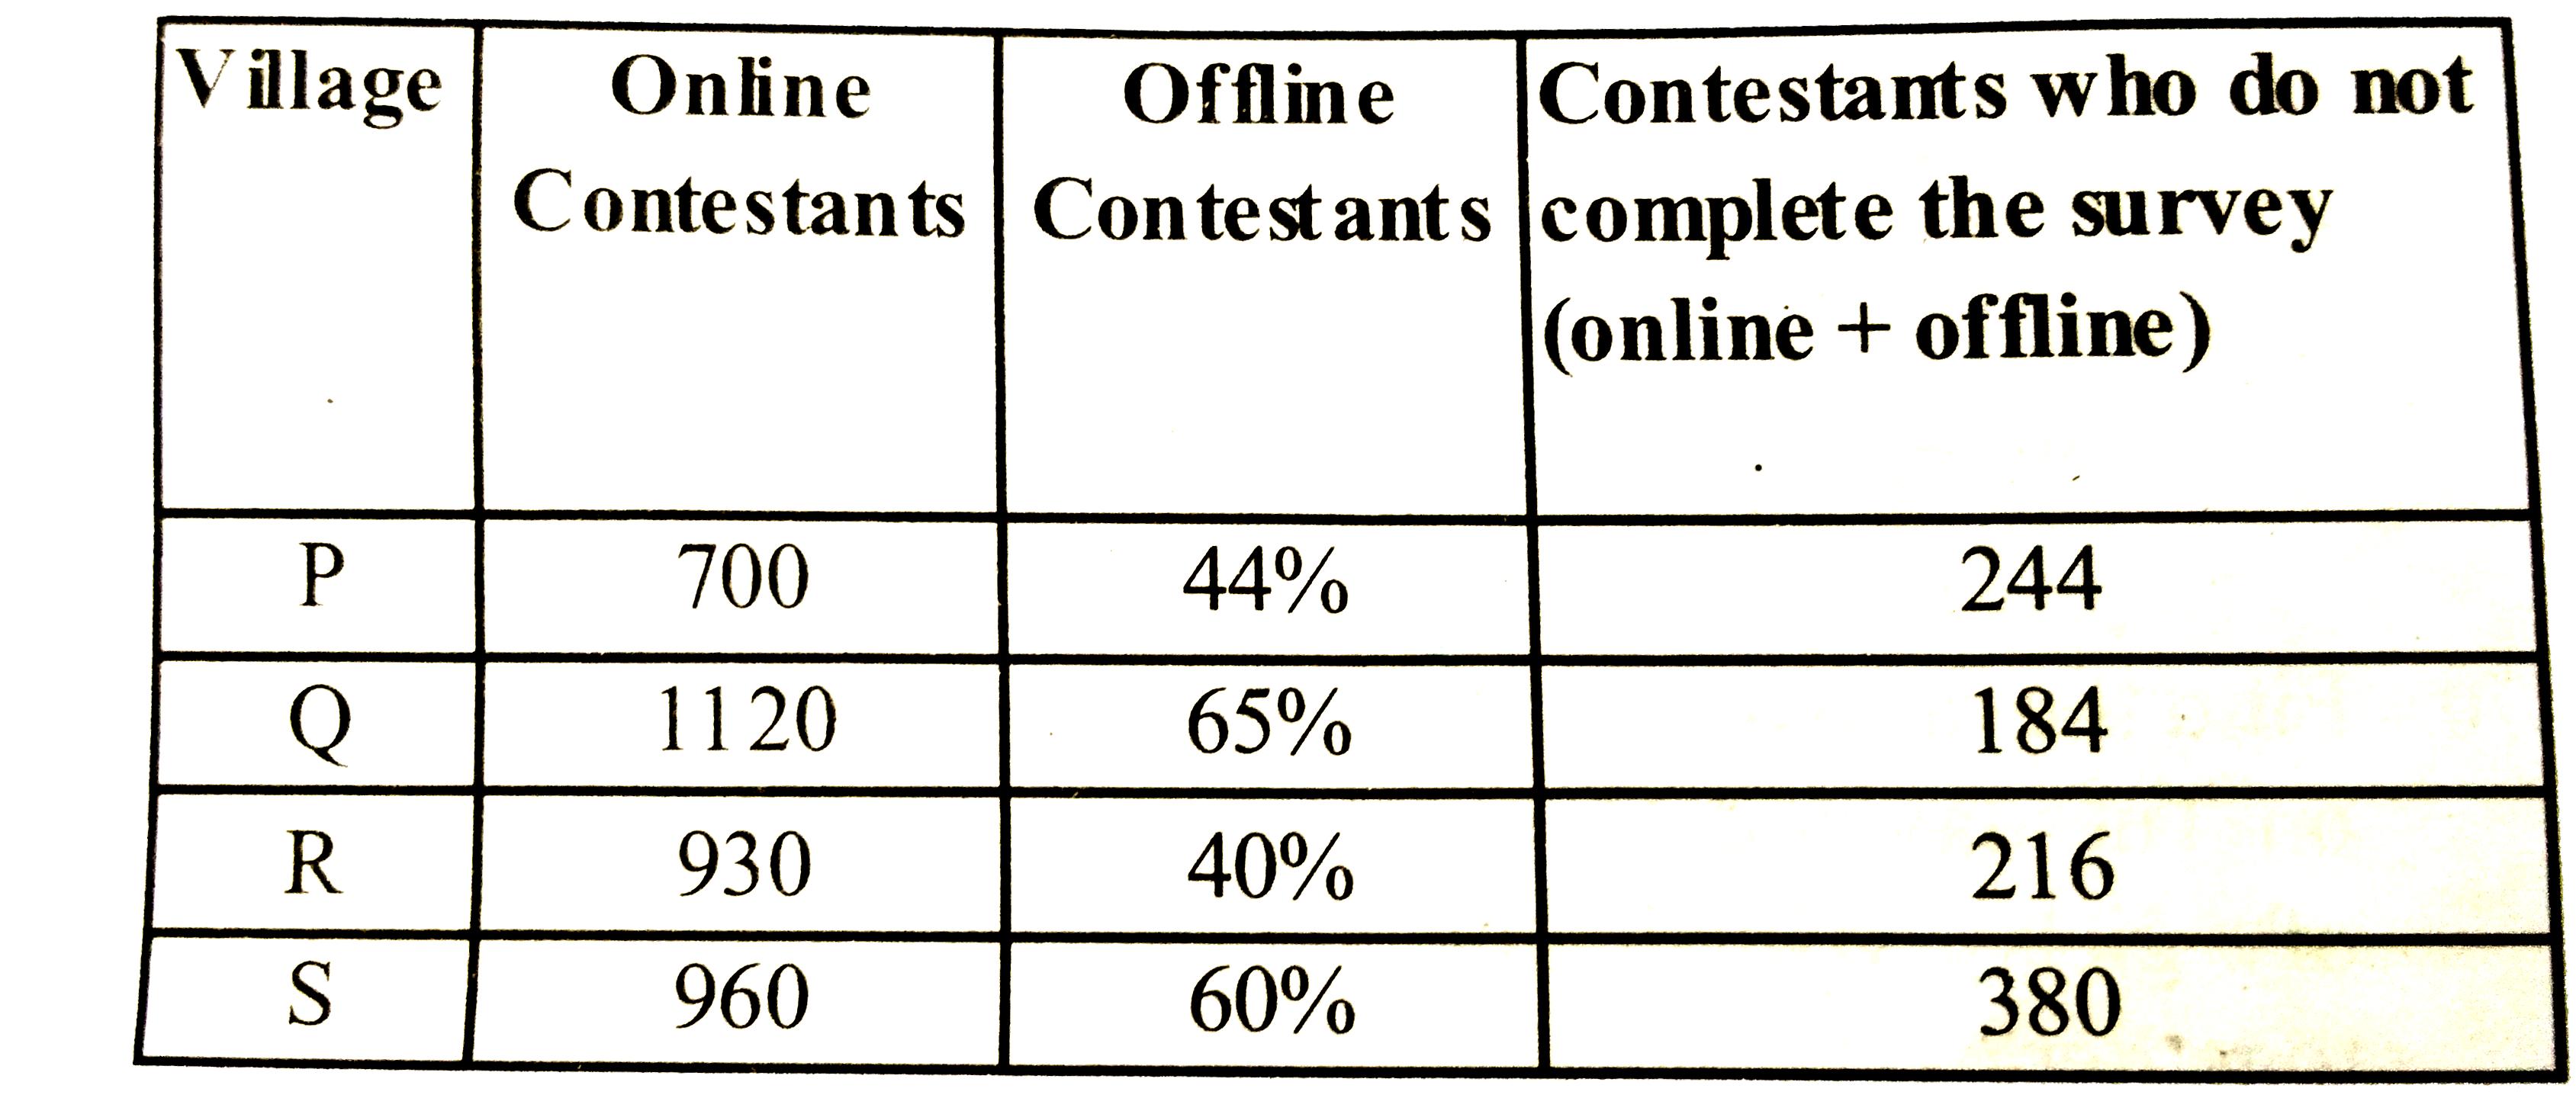 The table shows the online and offline contestants takin part in a survey from four villages and total contestant who hae not completed the survey (online and offline)   Note 1:  Total contestants in a villages= Online onstestants+ Offline contestants   2 : Total contestants in a village = Constestant who complete the survey + contestants who do not complete survery       Total number of contestants from village R who completed the survery are how much more or less than total number of contestant who completed the survey from village Q ?